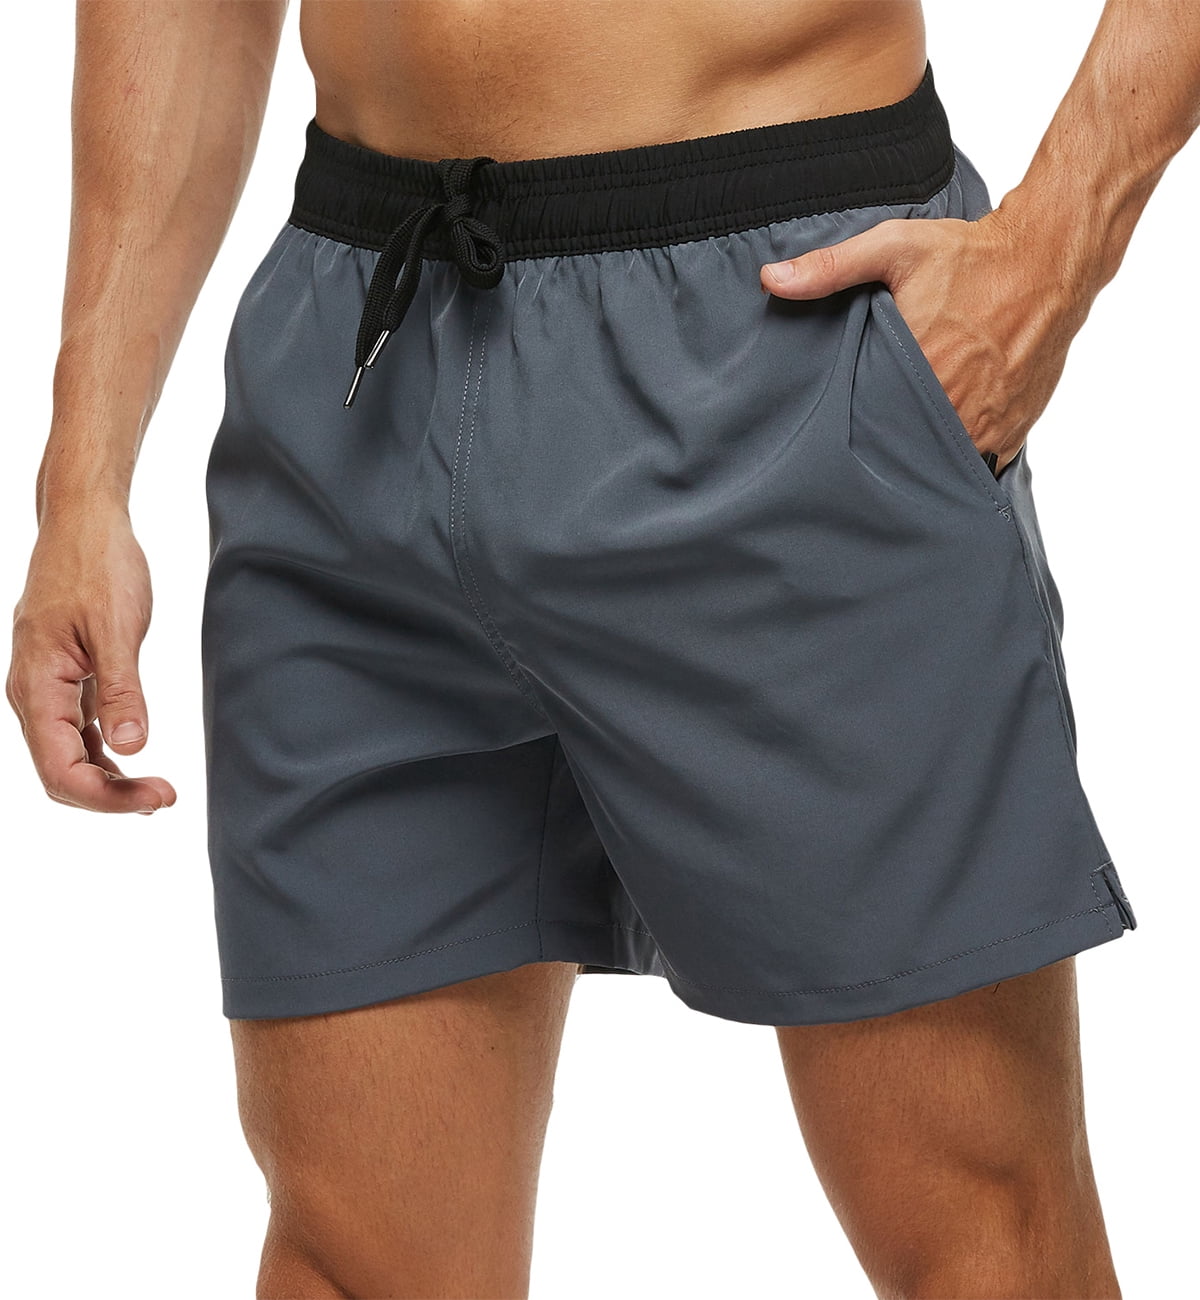 YuKaiChen Men's Swimming Trunks Quick Dry Beach Shorts Casual Running Gym Shorts with Zipper Pockets and Mesh Lining 